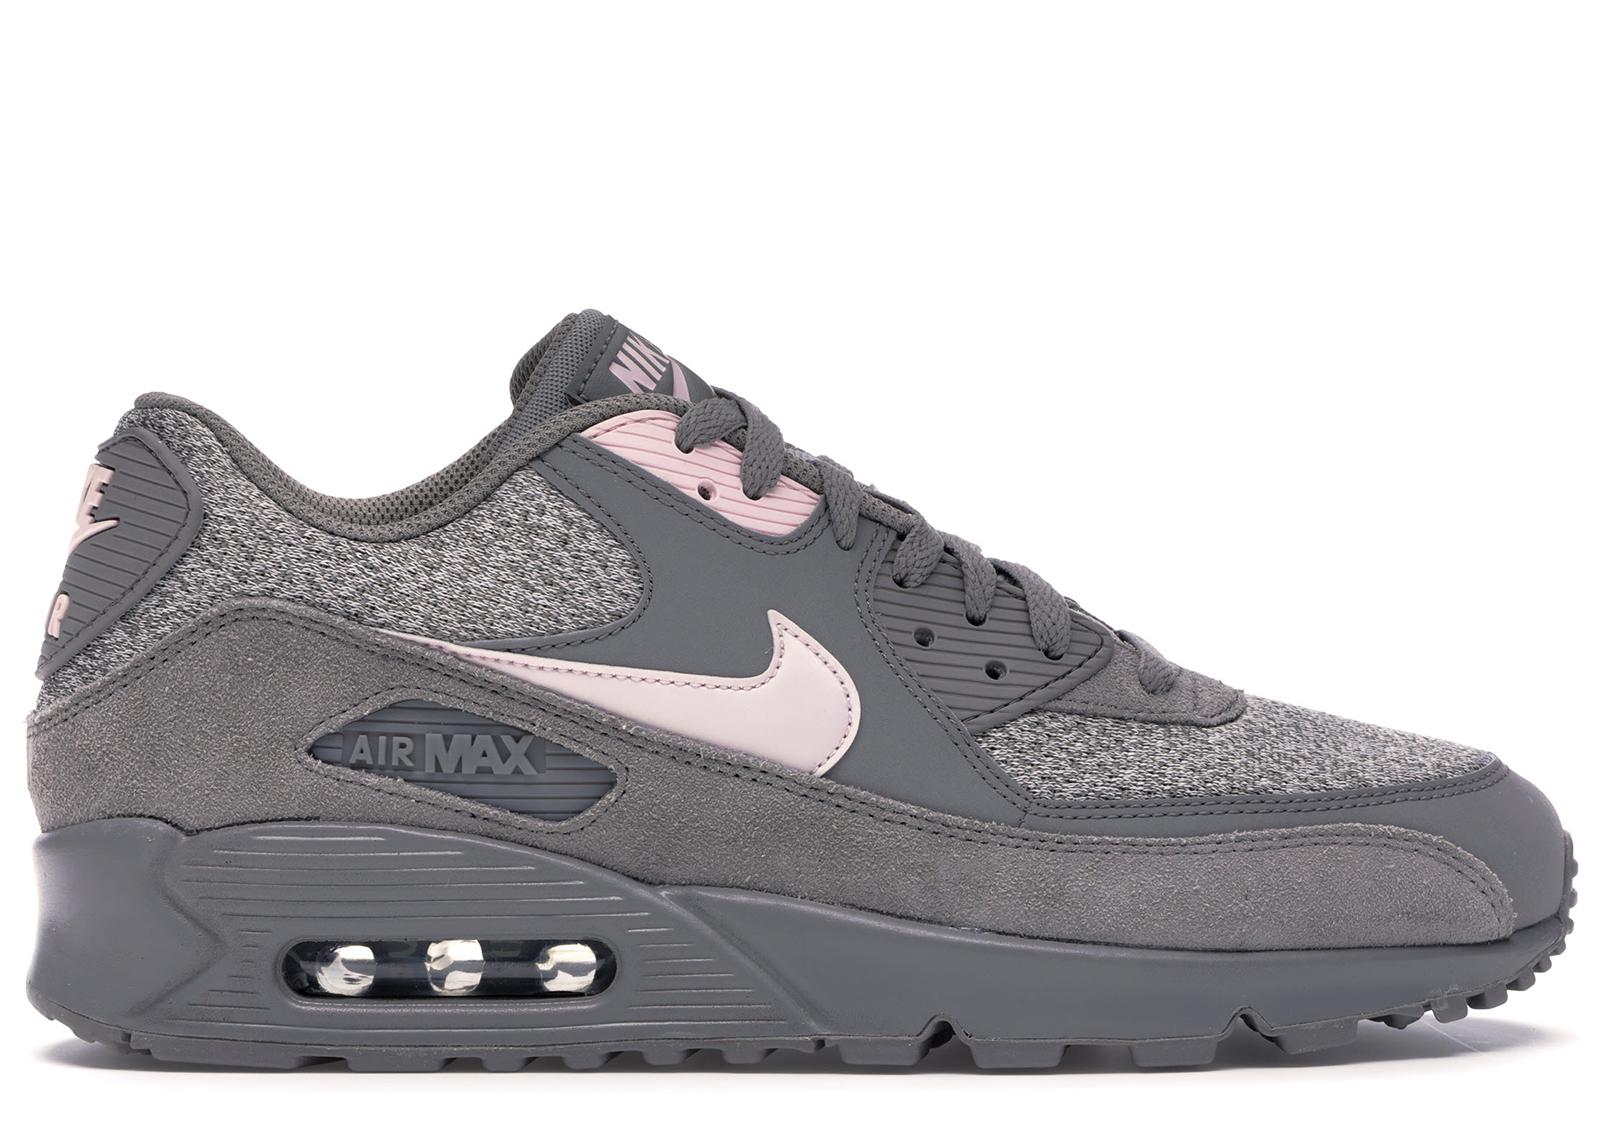 Nike Air Max 90 Dust Arctic Pink in 